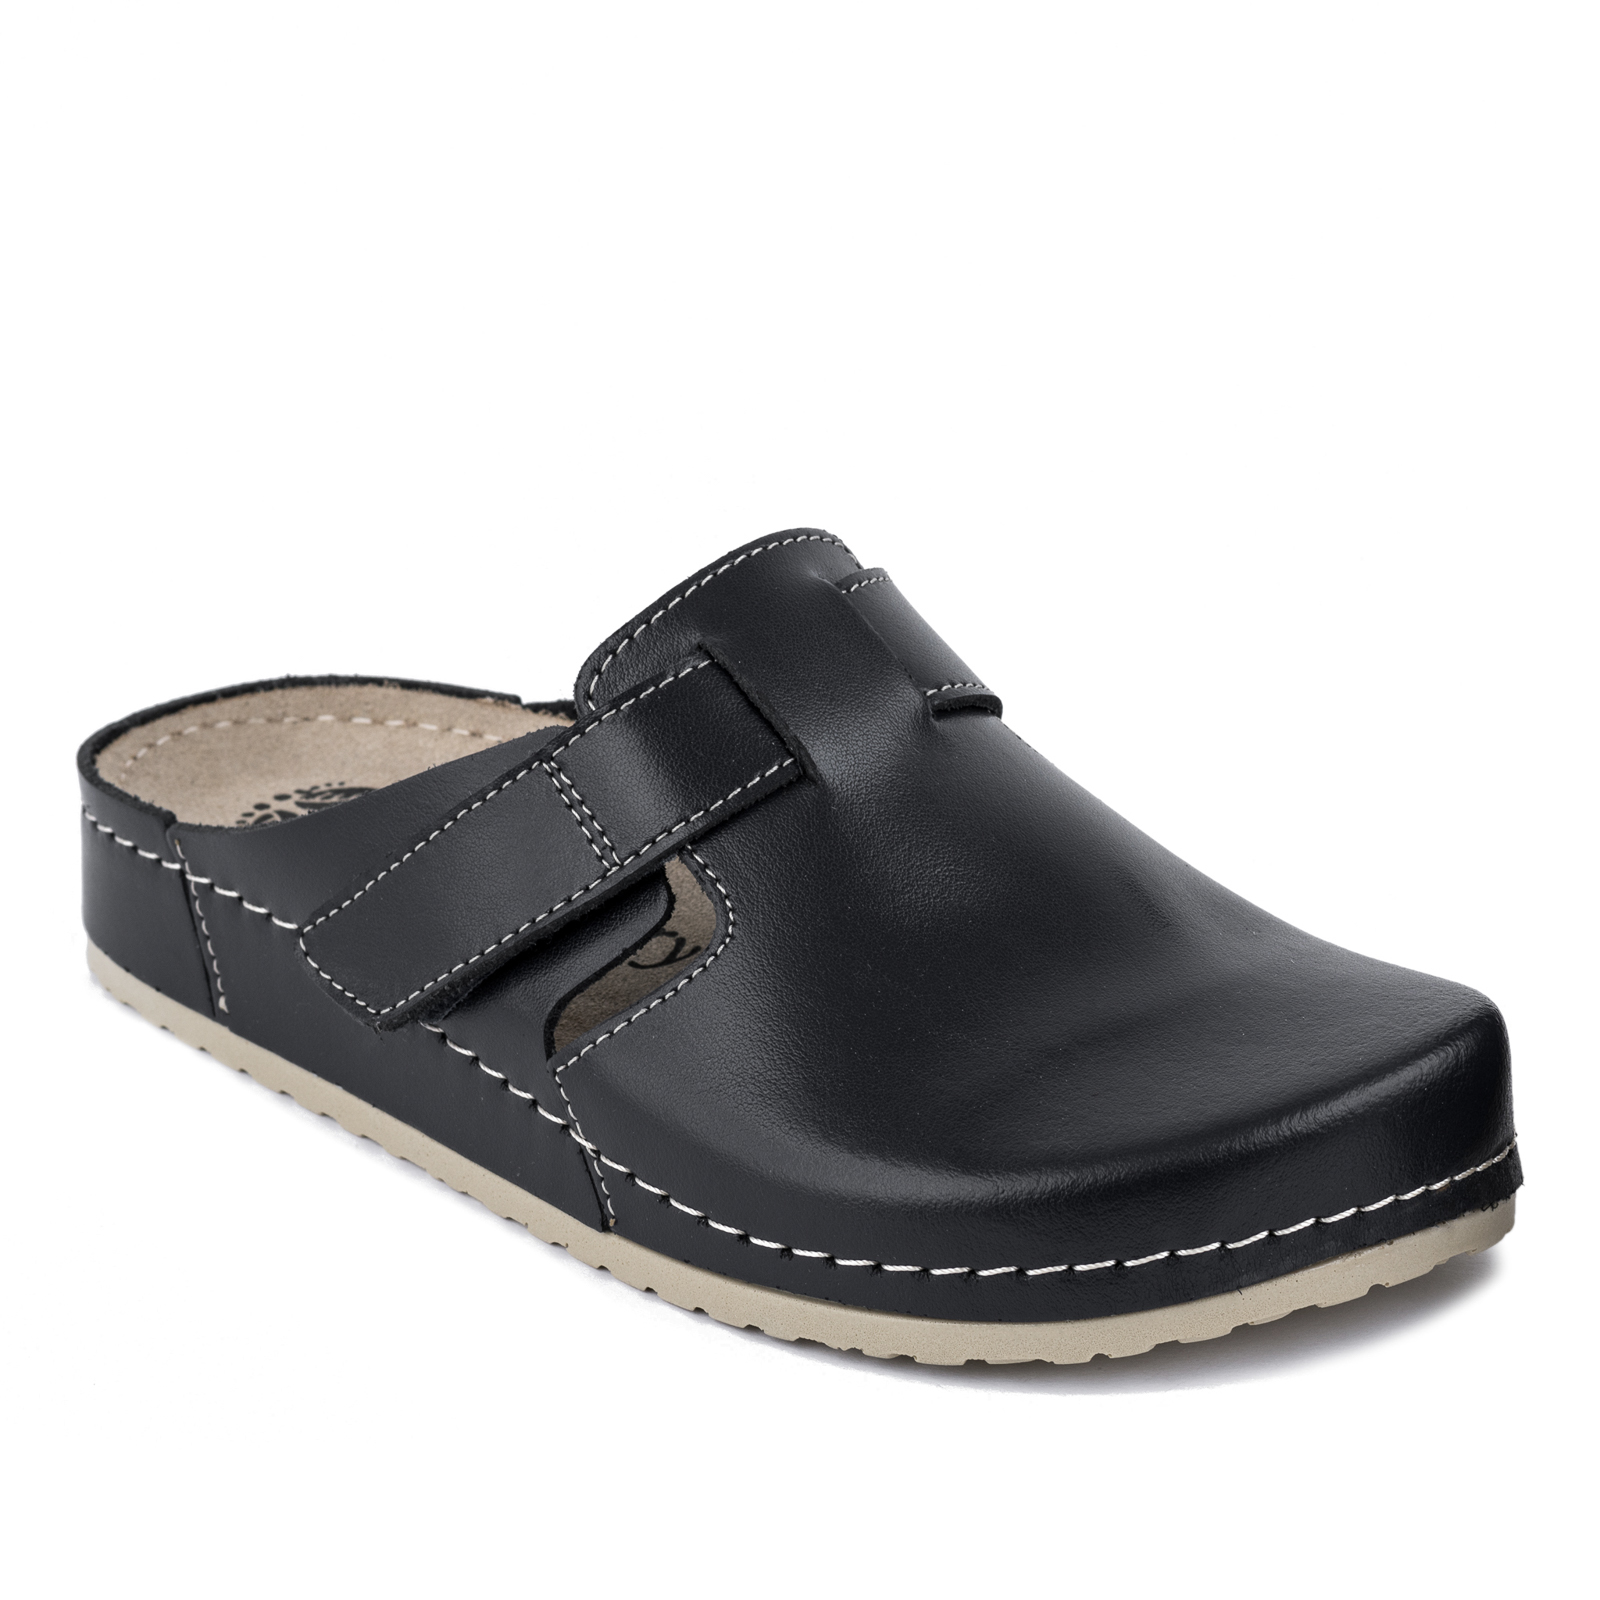 ANATOMIC LEATHER  CLOGS WITH VELCRO BAND - NAVY BLUE